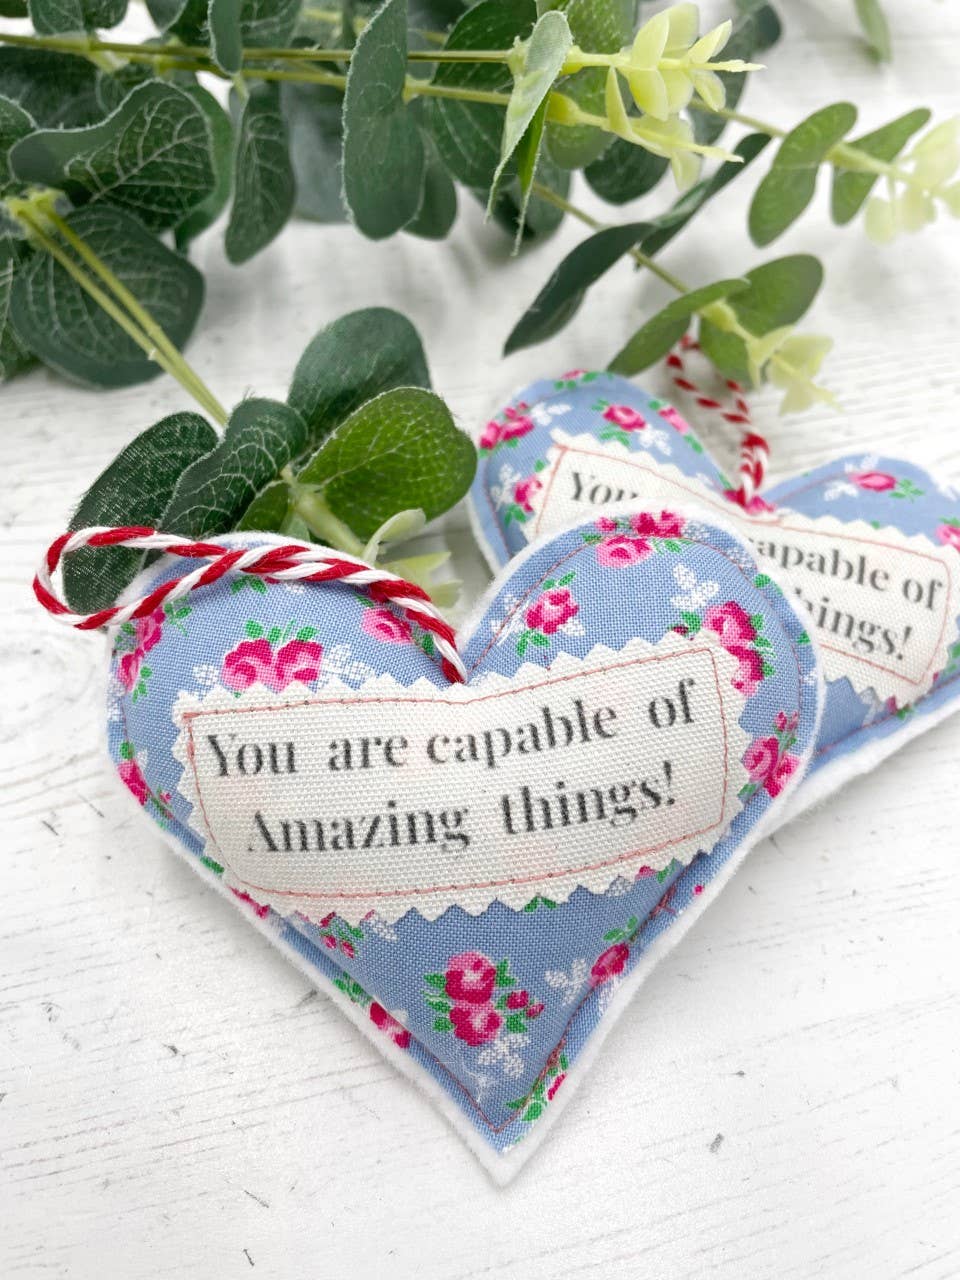 You are capable of Amazing things! Self Care hanging heart